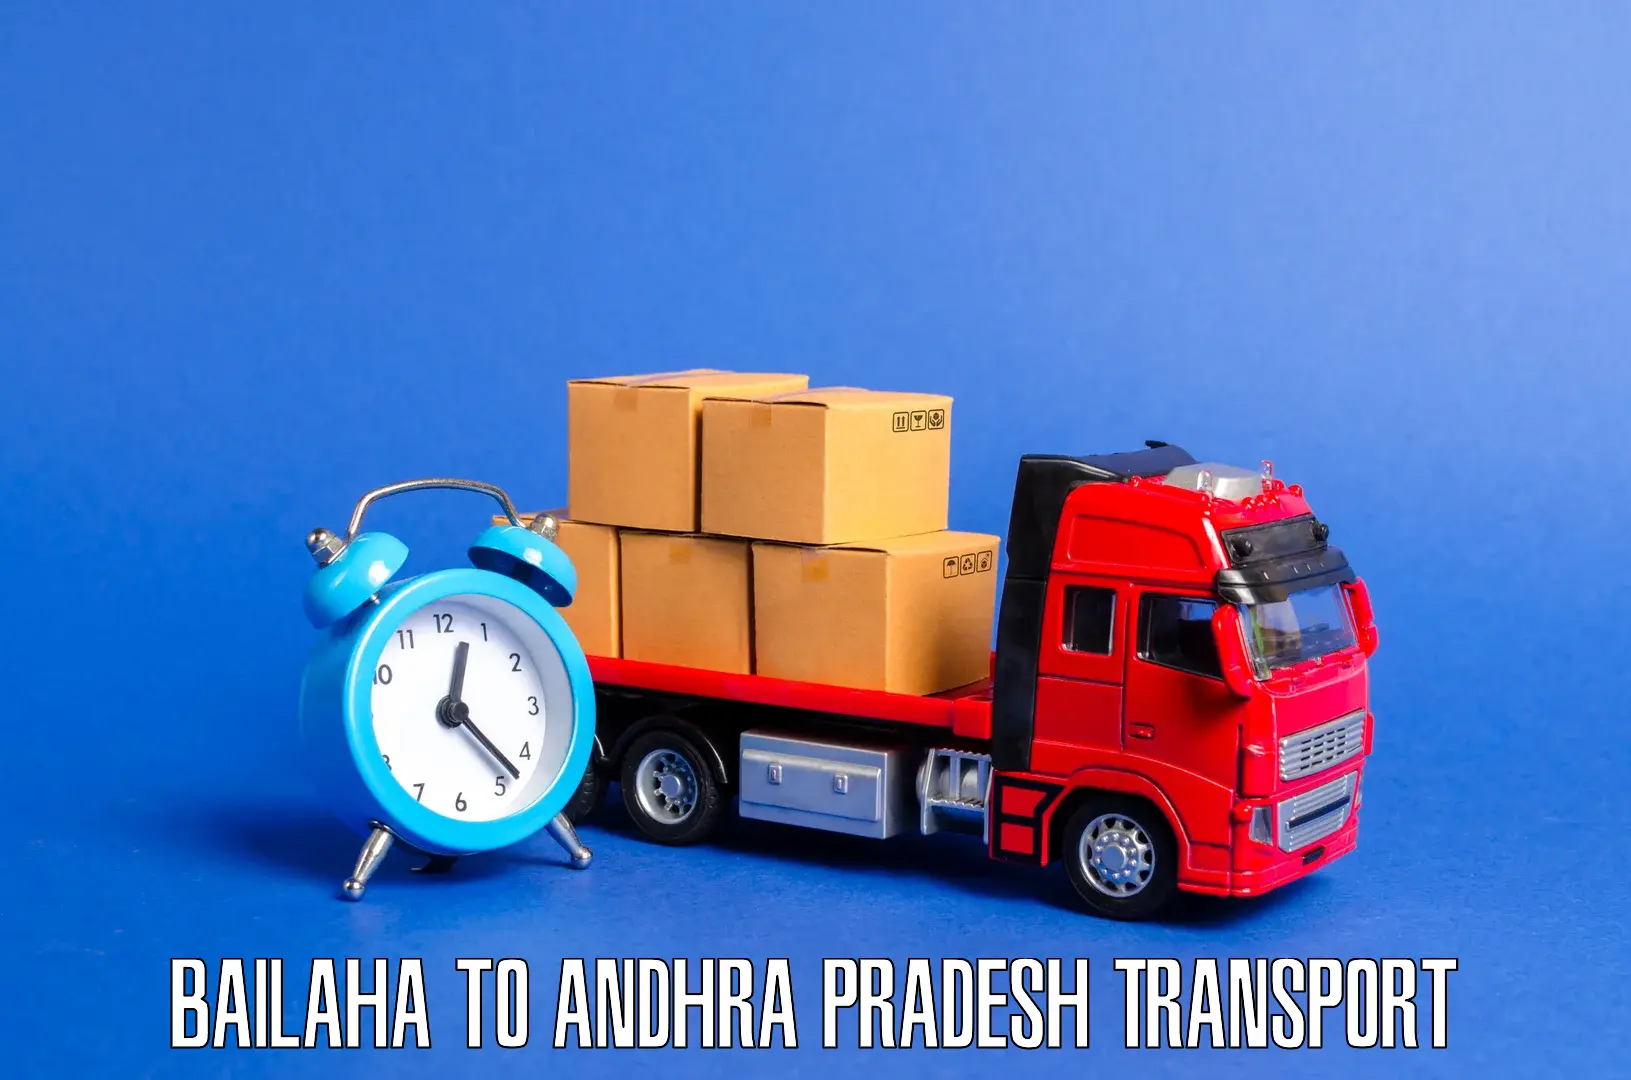 Container transport service Bailaha to Kuppam